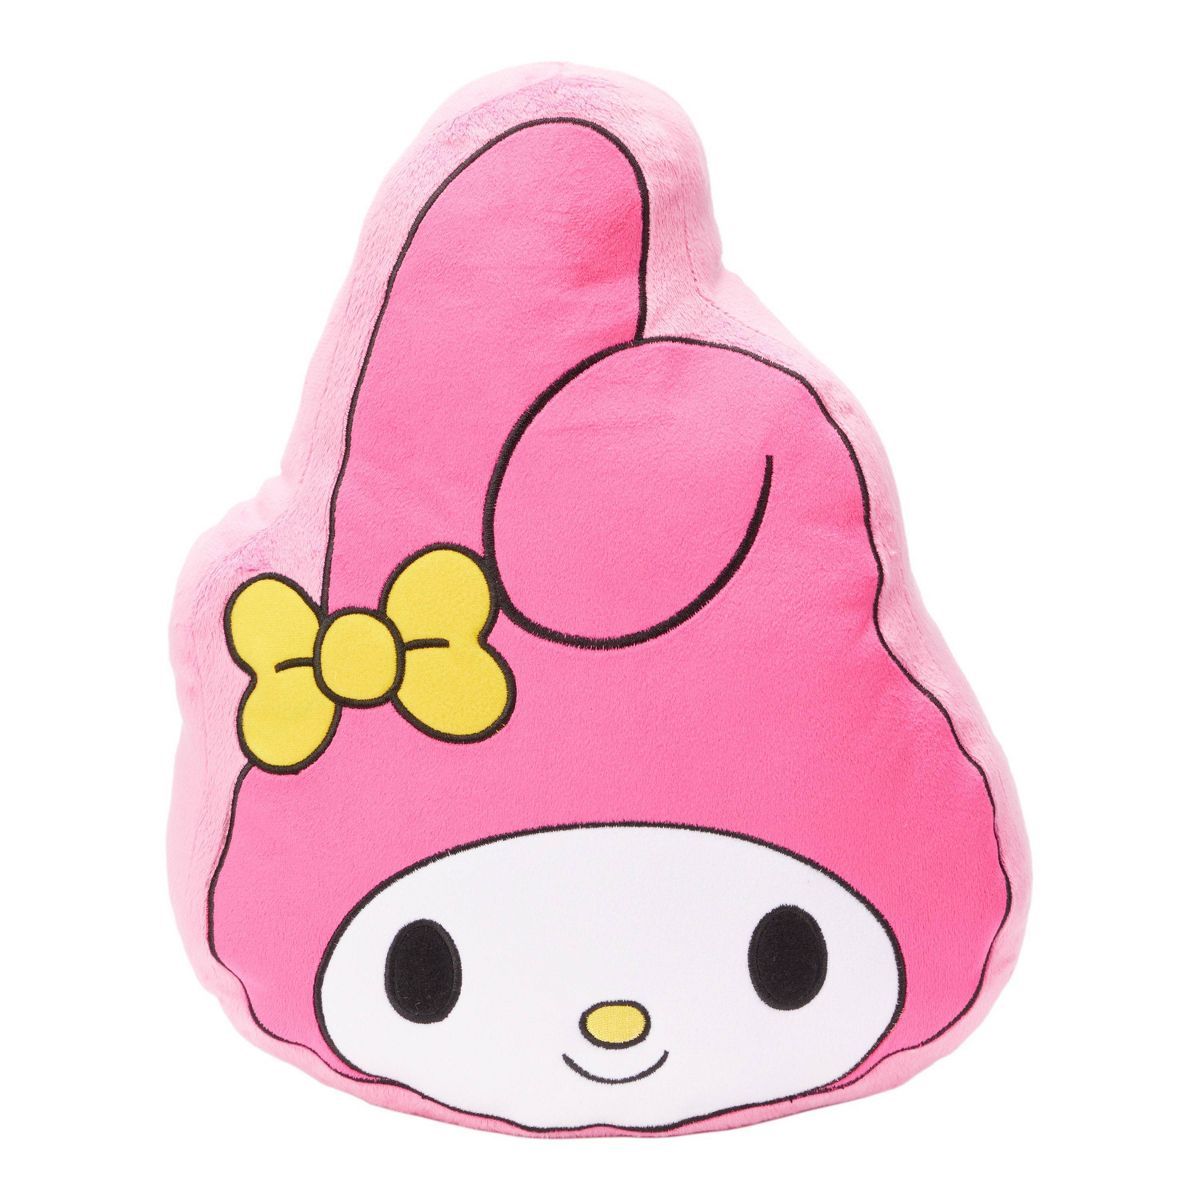 Hello Kitty and Friends My Melody Dec Pillow | Target